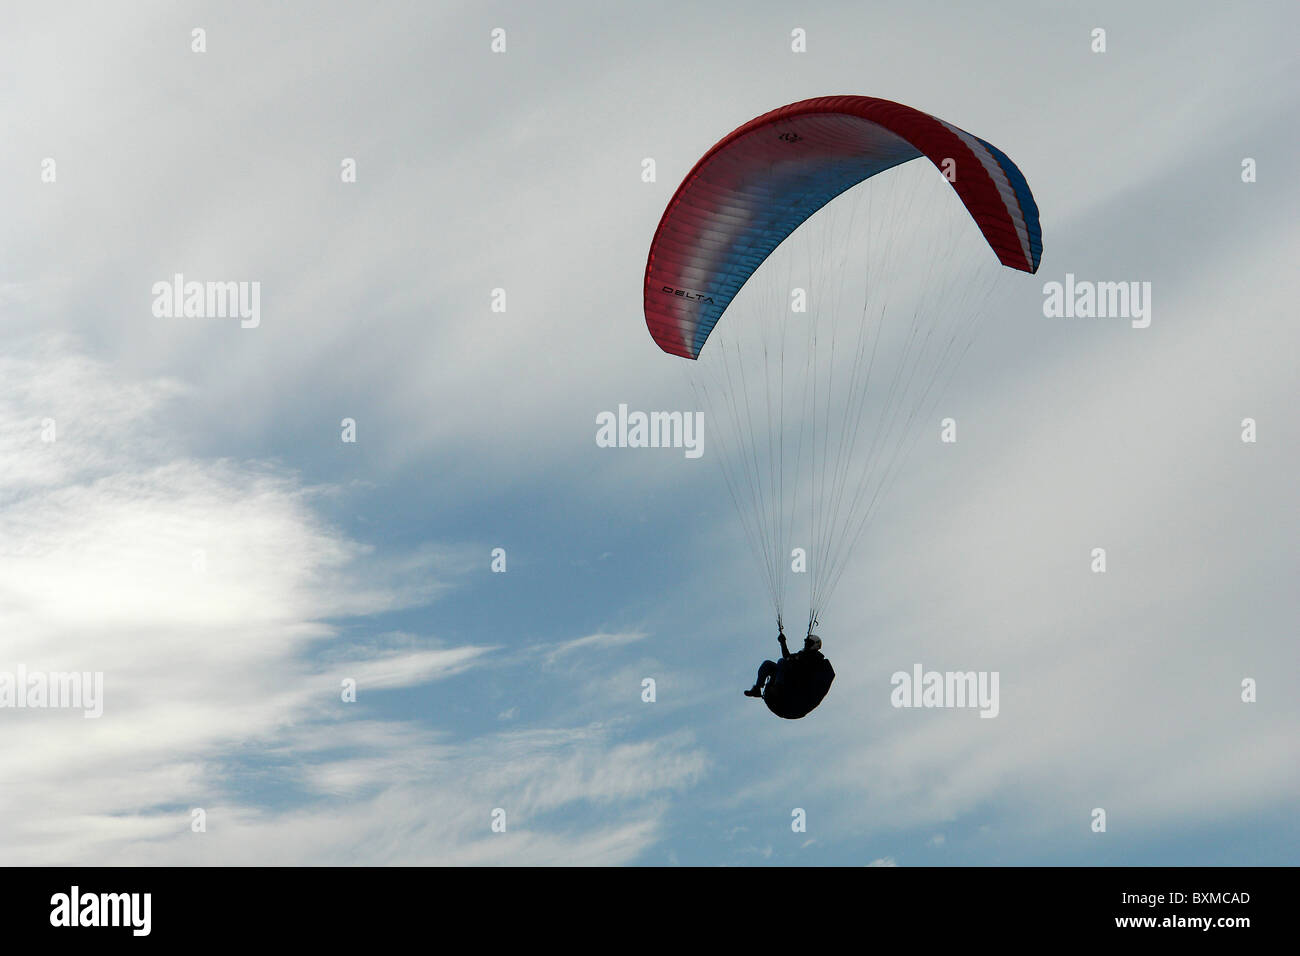 I fly free and solitaire, flying at dusk of a cloudy day Stock Photo